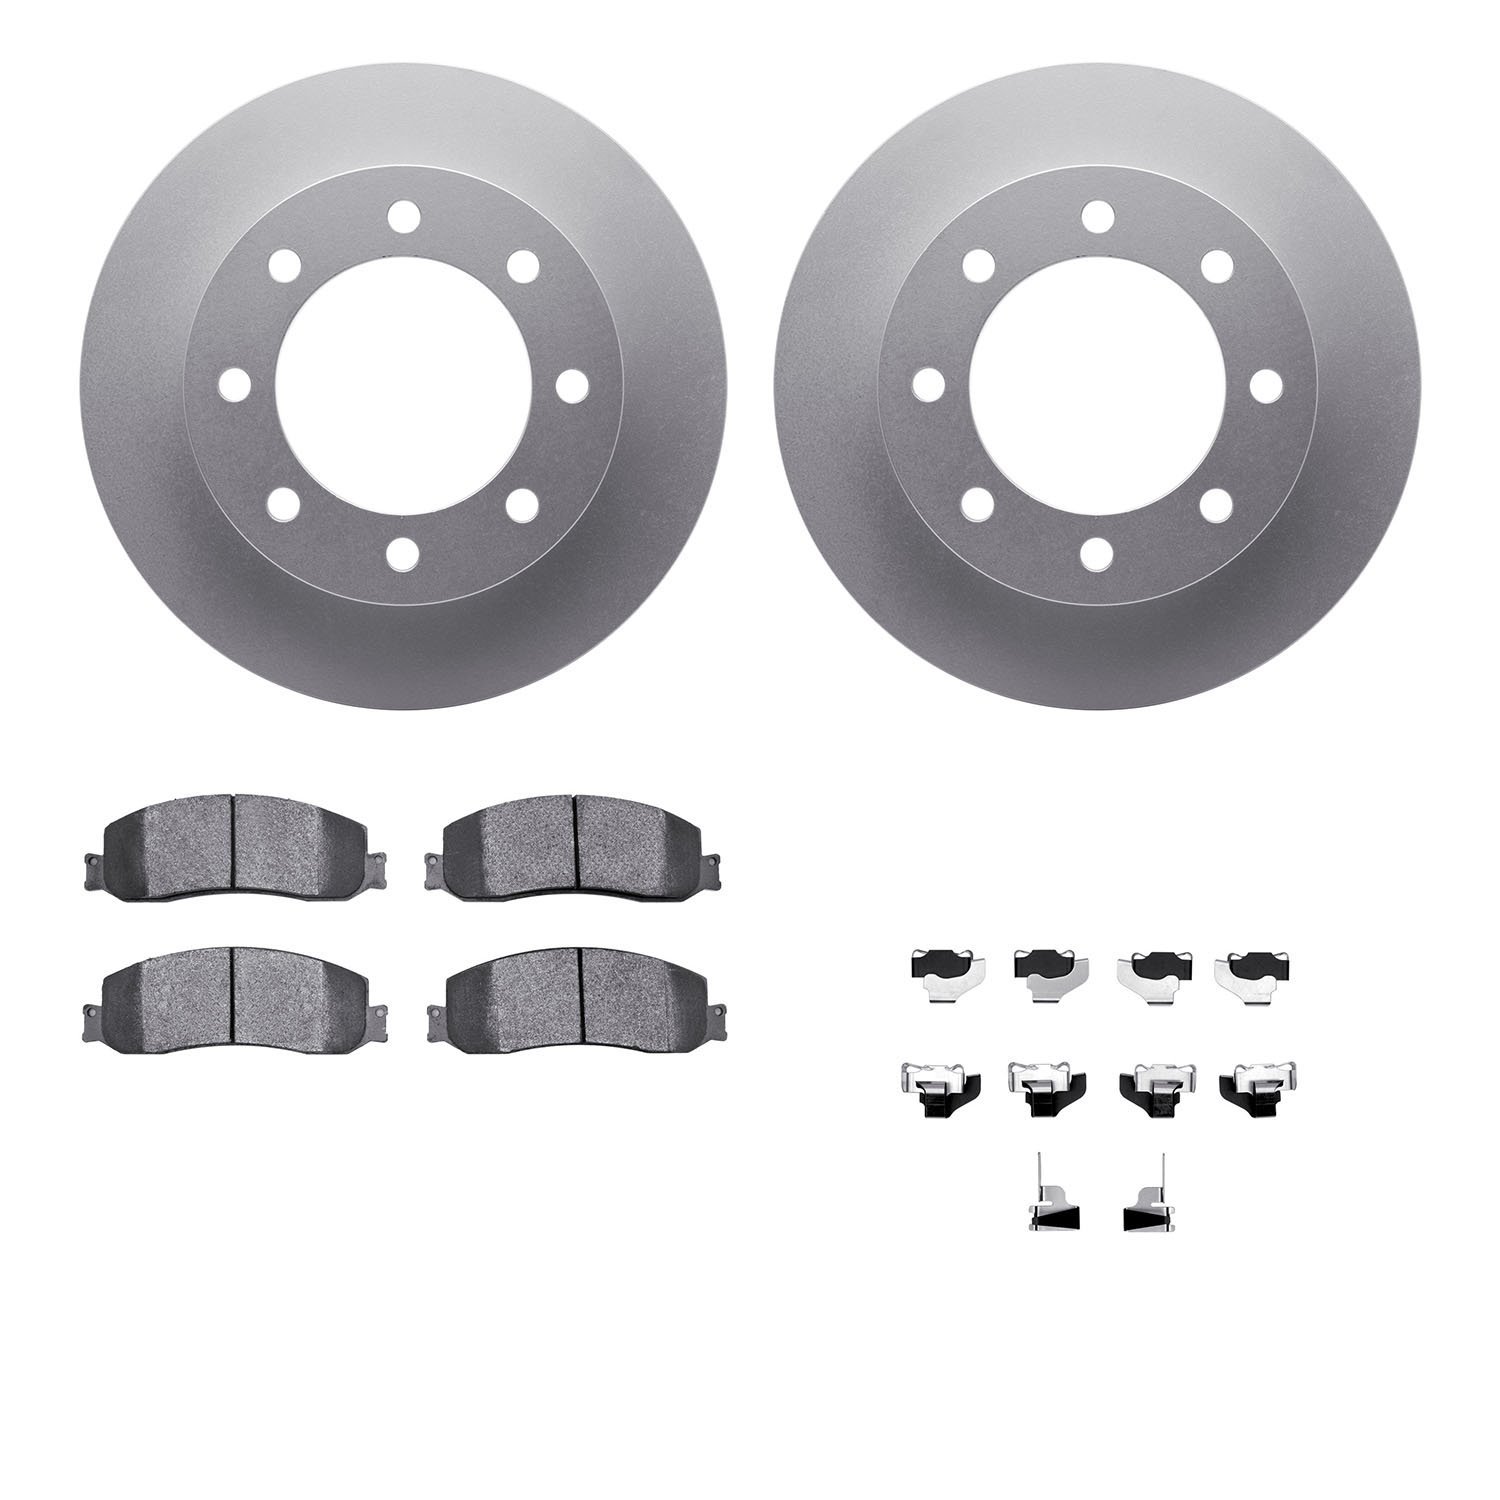 4412-54055 Geospec Brake Rotors with Ultimate-Duty Brake Pads & Hardware, 2010-2012 Ford/Lincoln/Mercury/Mazda, Position: Front